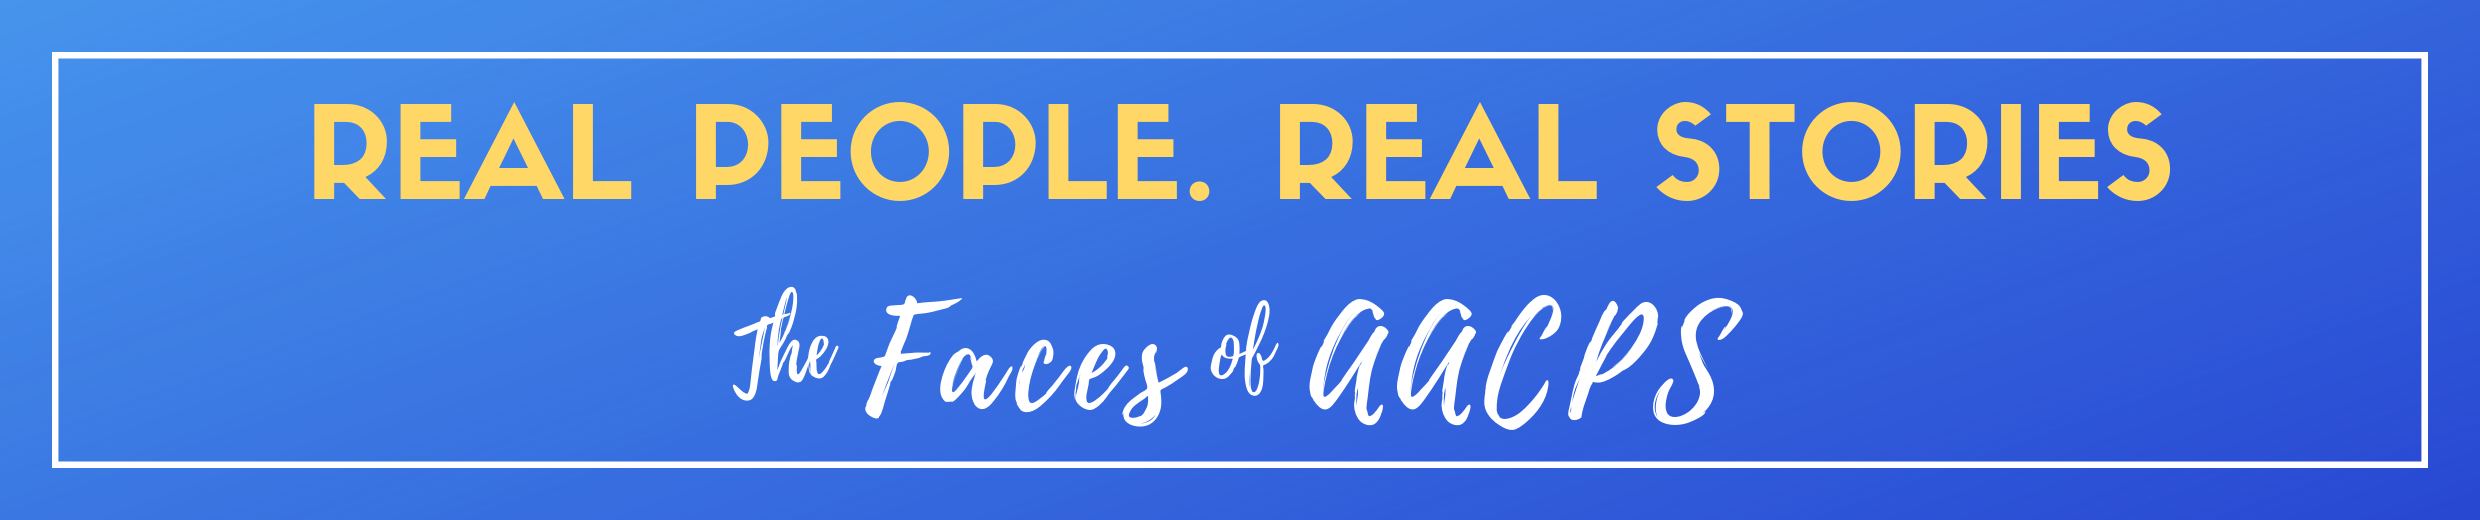 Real People. Real Stories: The Faces of AACPS